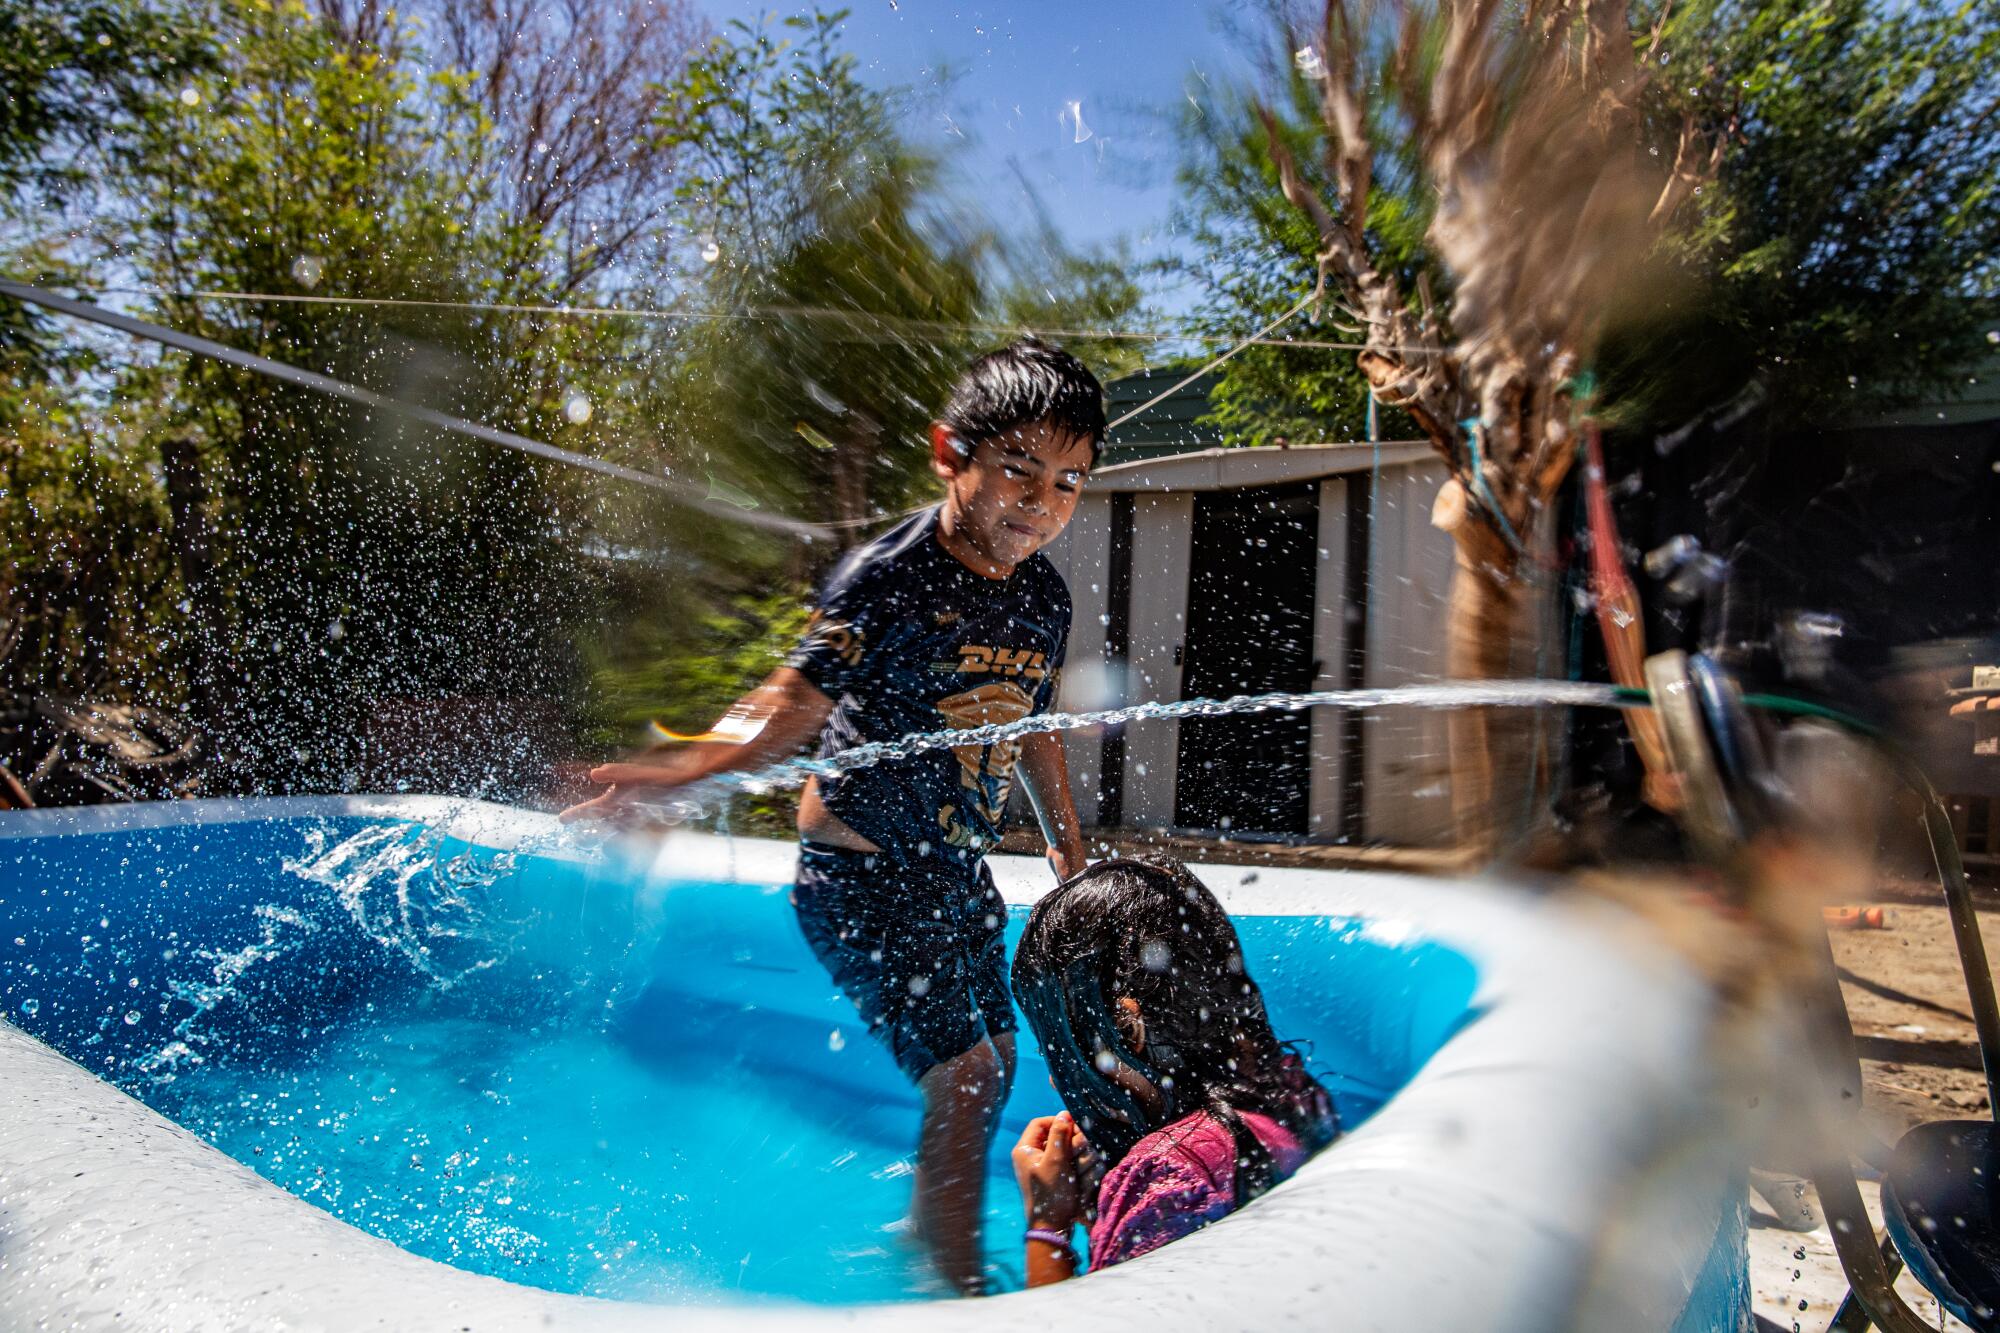 Two children play in a pool at their mobile home.